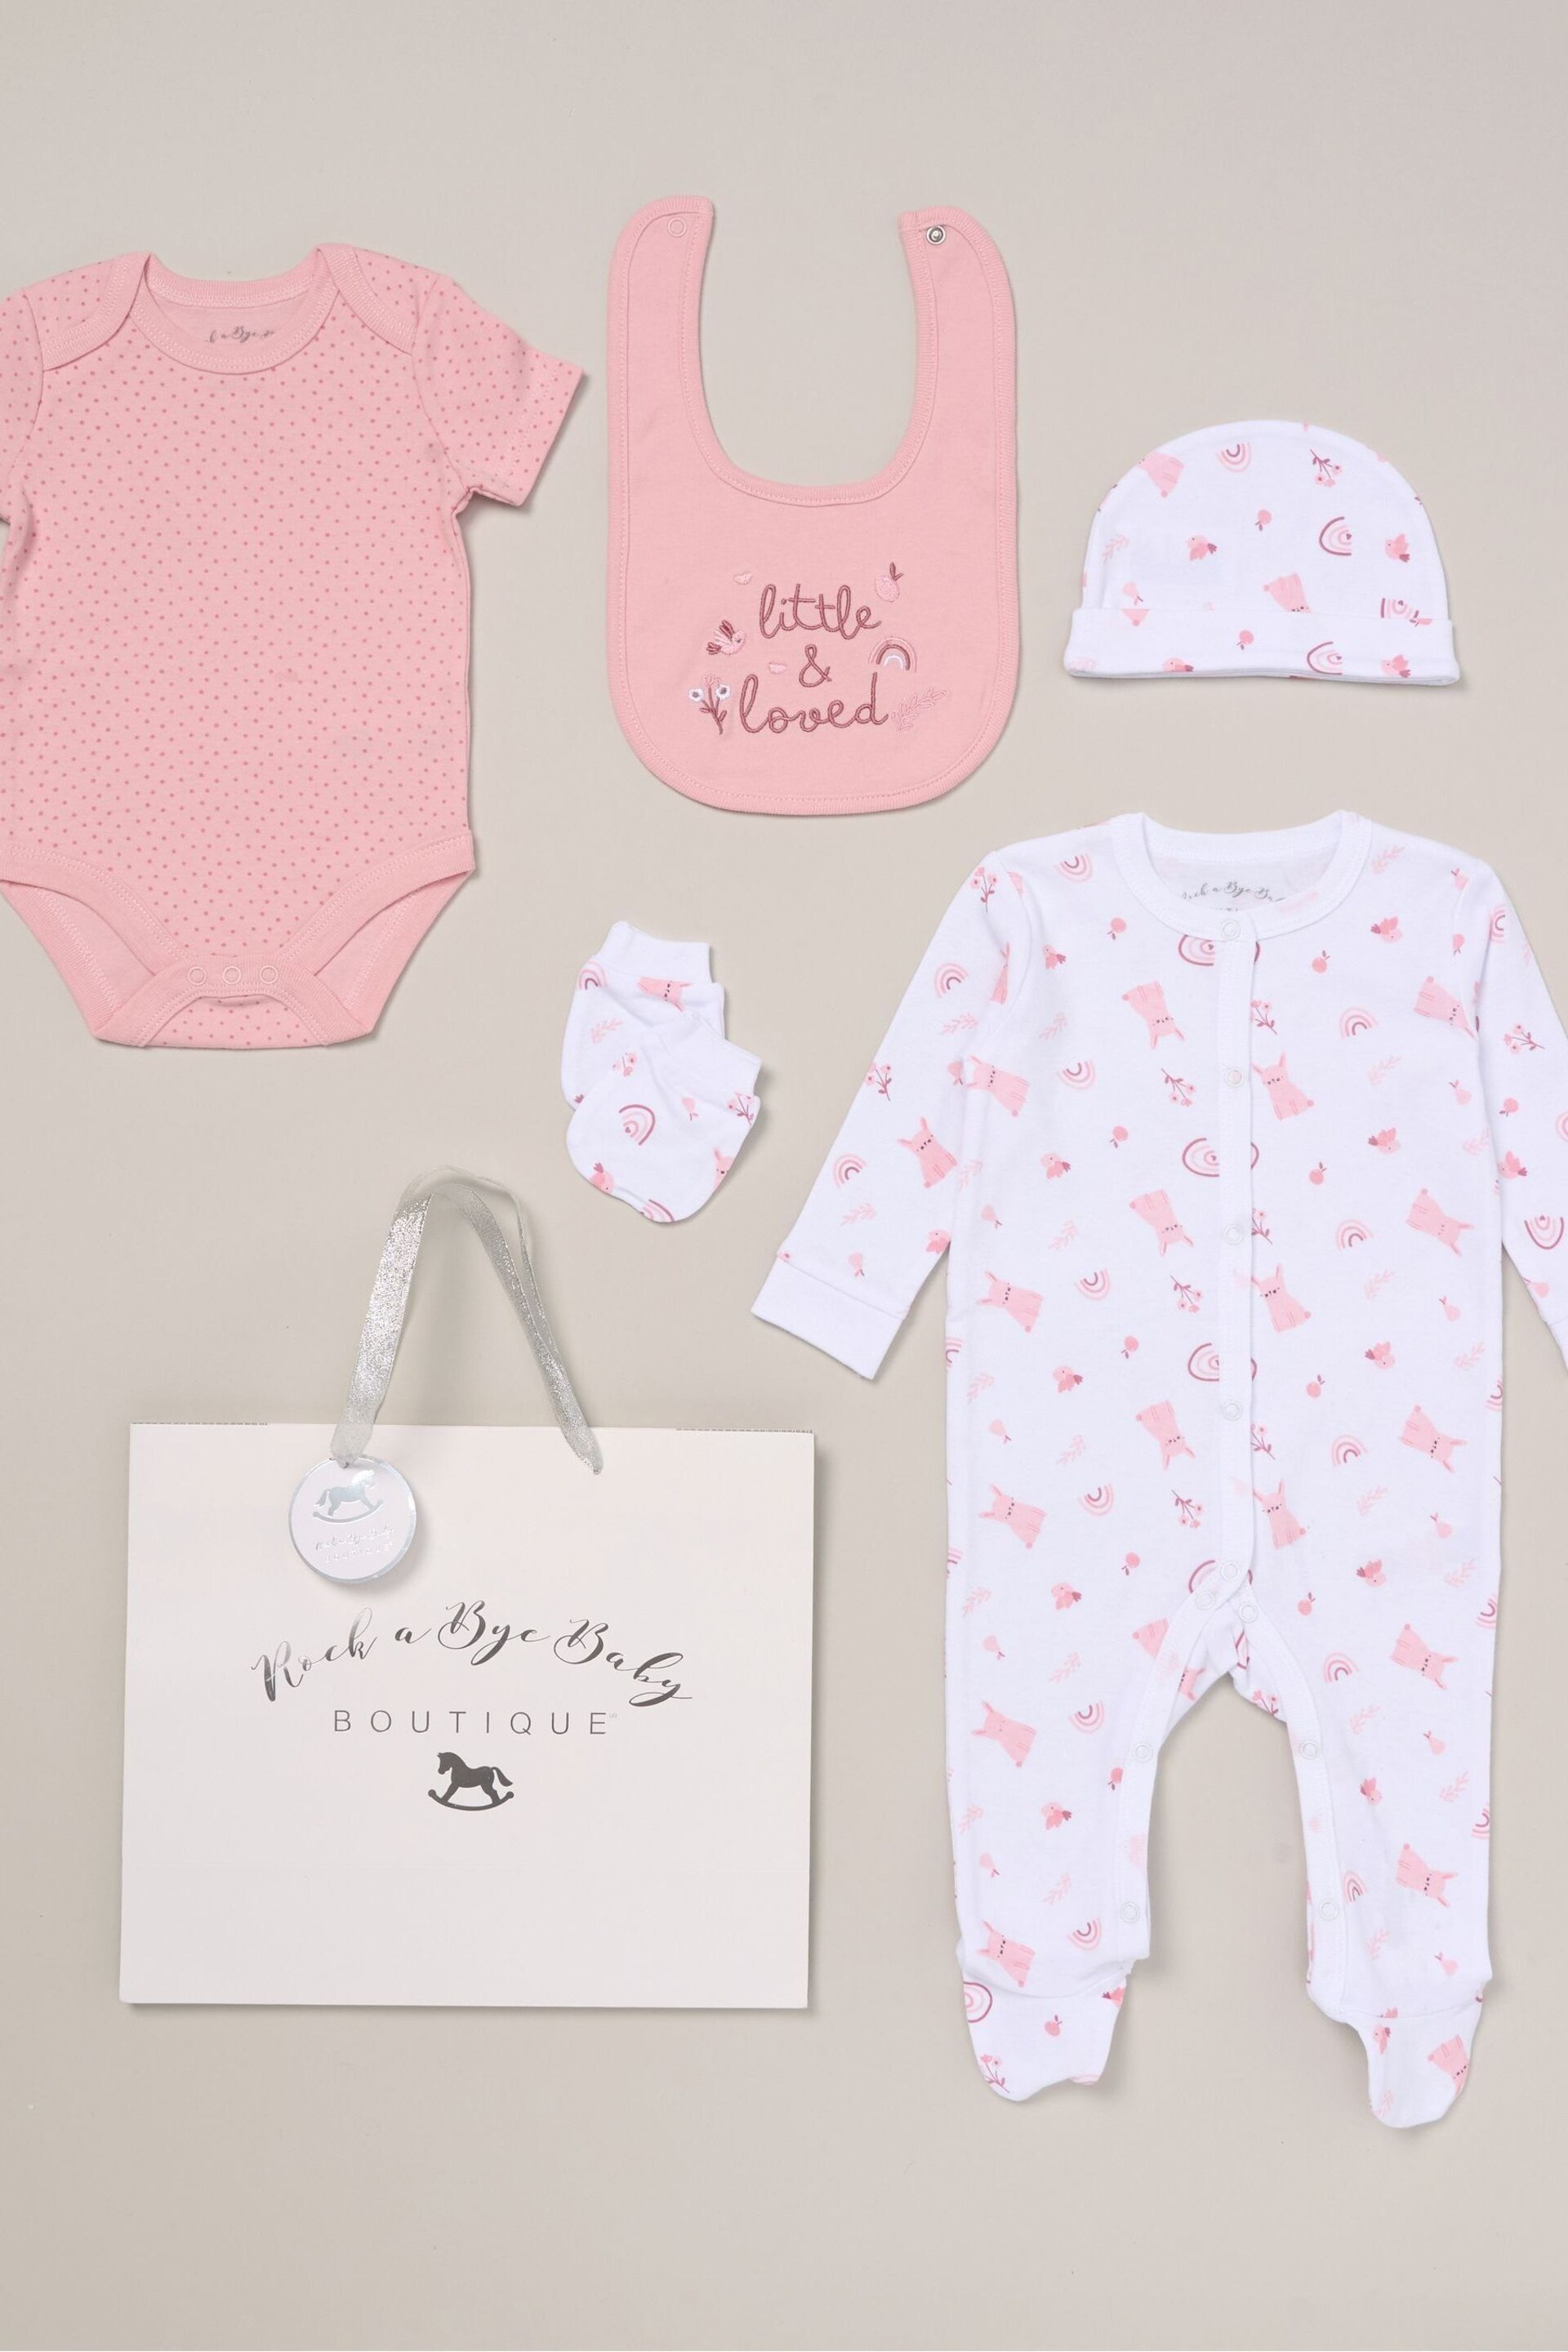 Rock-A-Bye Baby Boutique Pink Printed All in One Cotton 5-Piece Baby Gift Set - Image 1 of 5